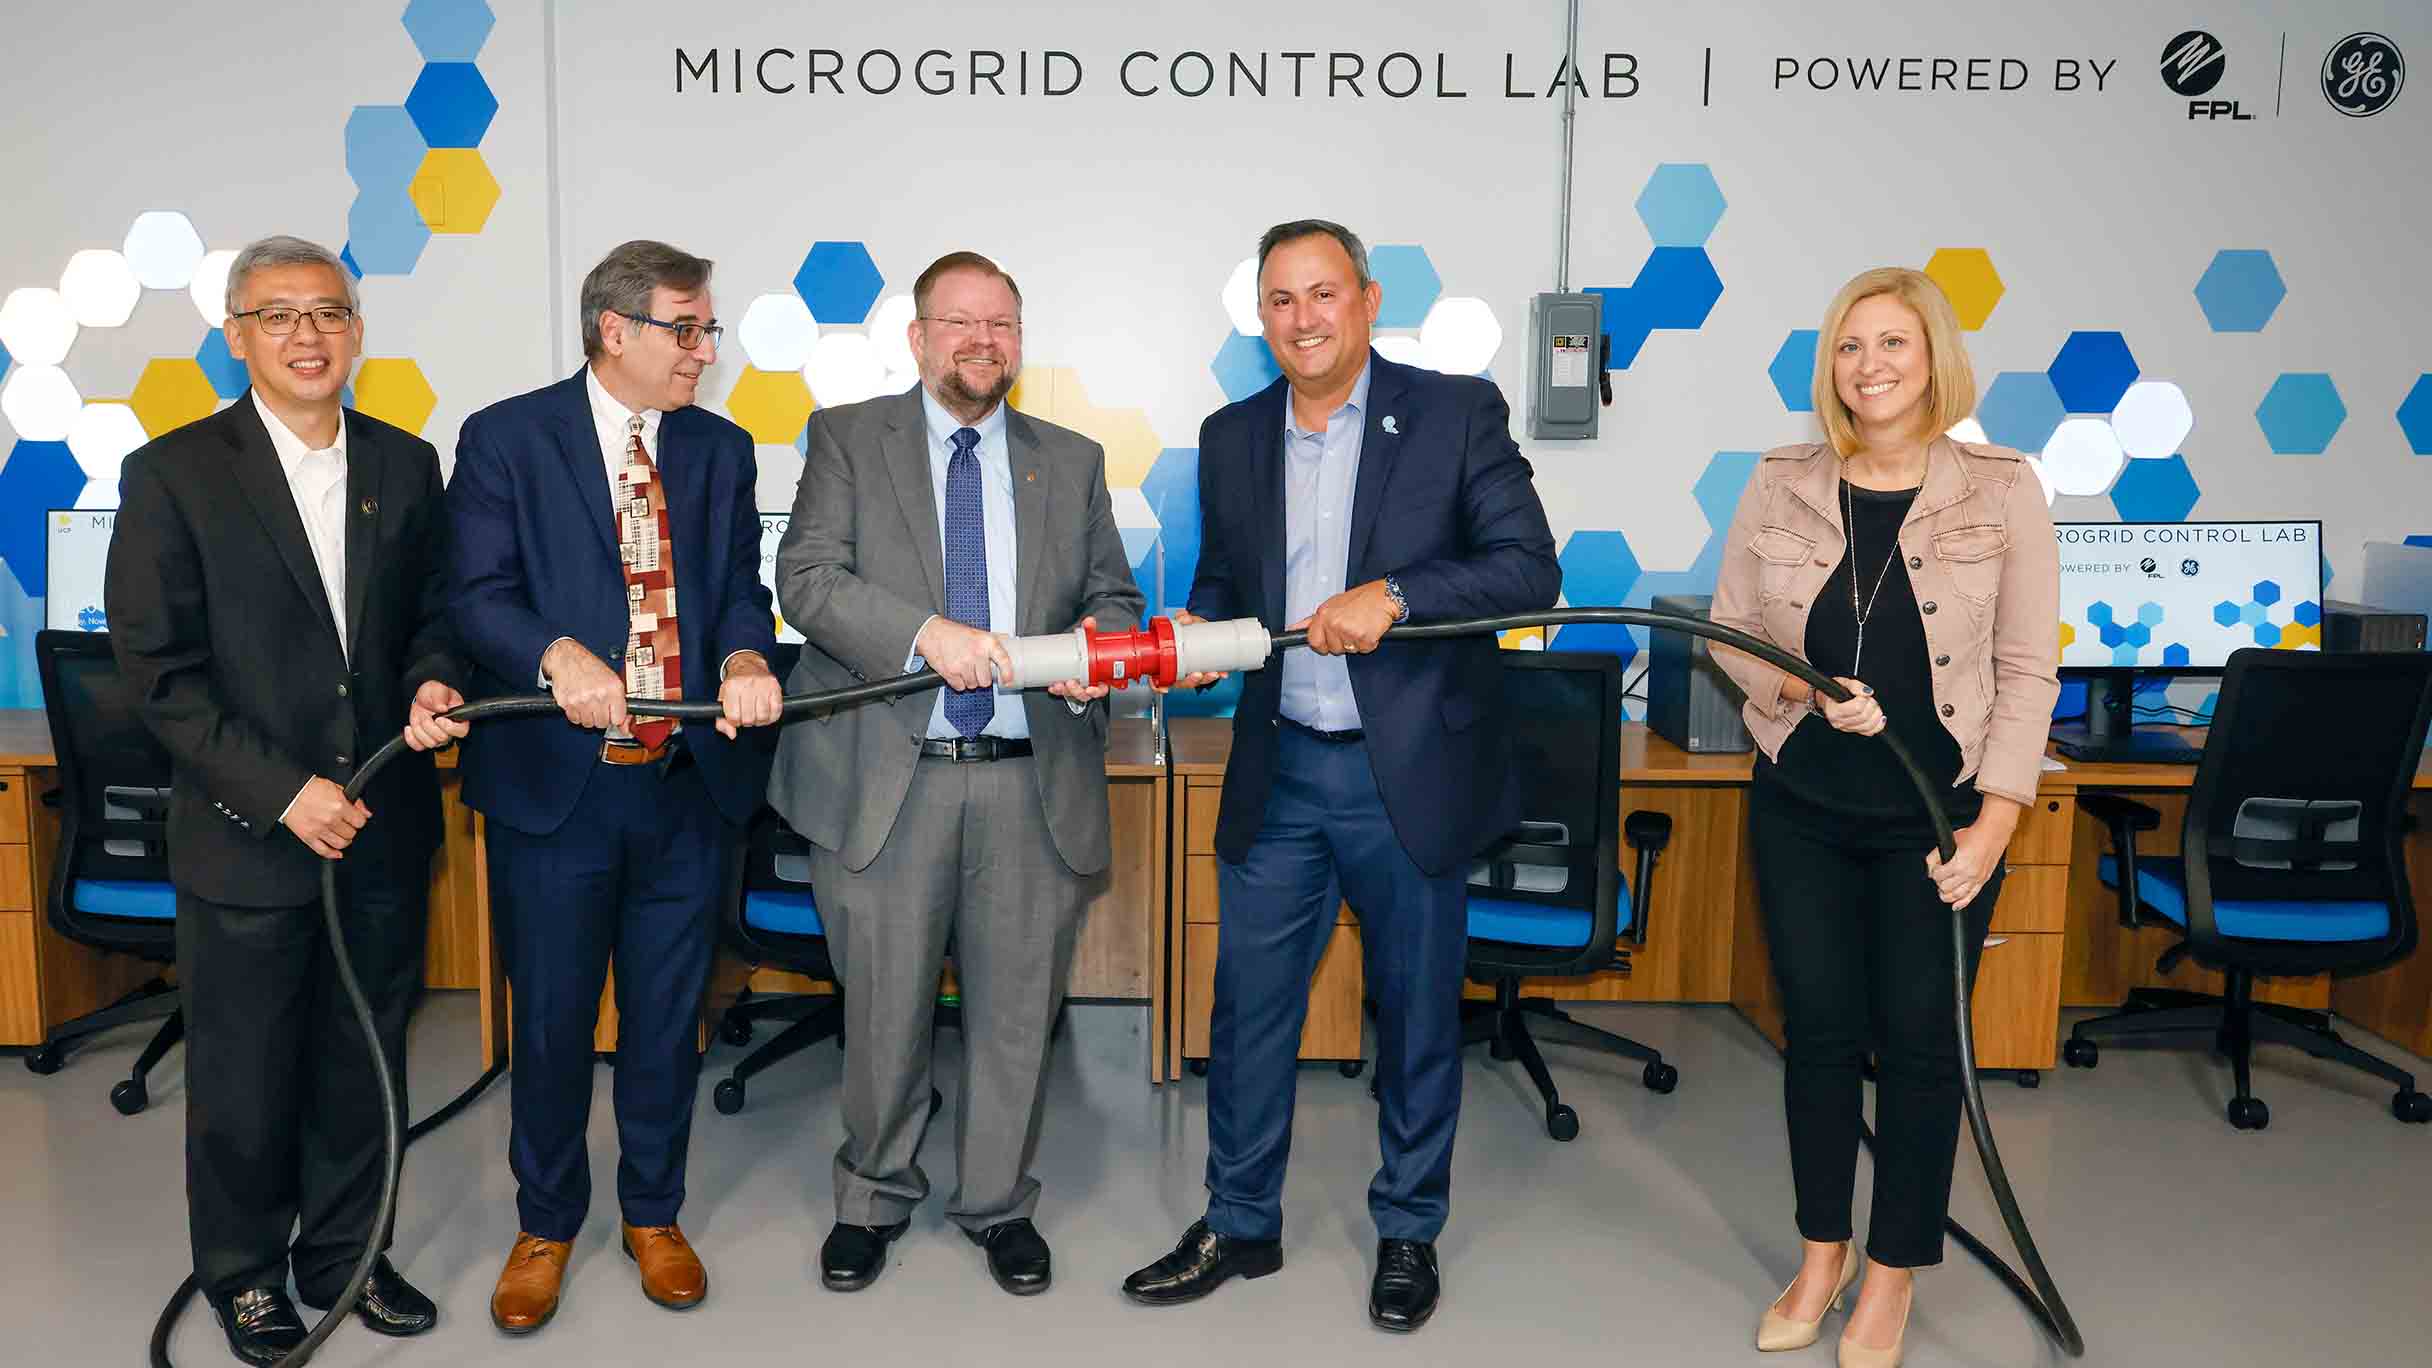 University of Central Florida and leadership and representatives from Florida Power &amp; Light and GE Digital “plugged in” the Microgrid Control Lab on Nov. 9, 2021. Image courtesy of FPL. 